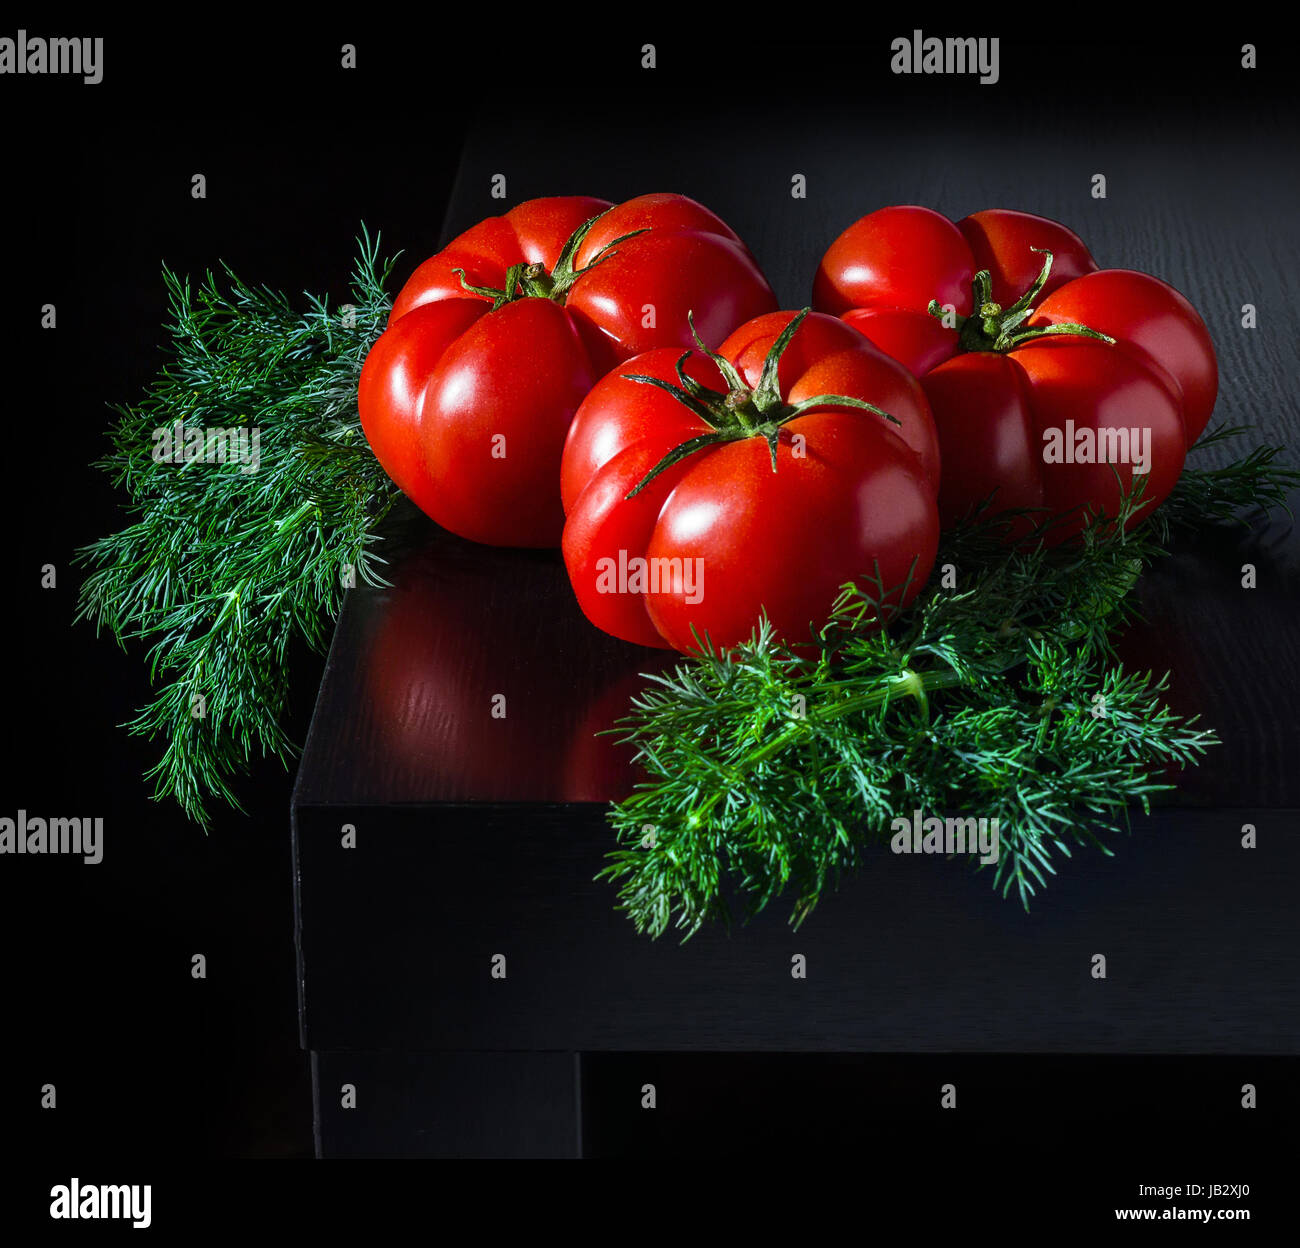 Three large fresh tomatoes and a sprig of dill on a dark wooden background Stock Photo